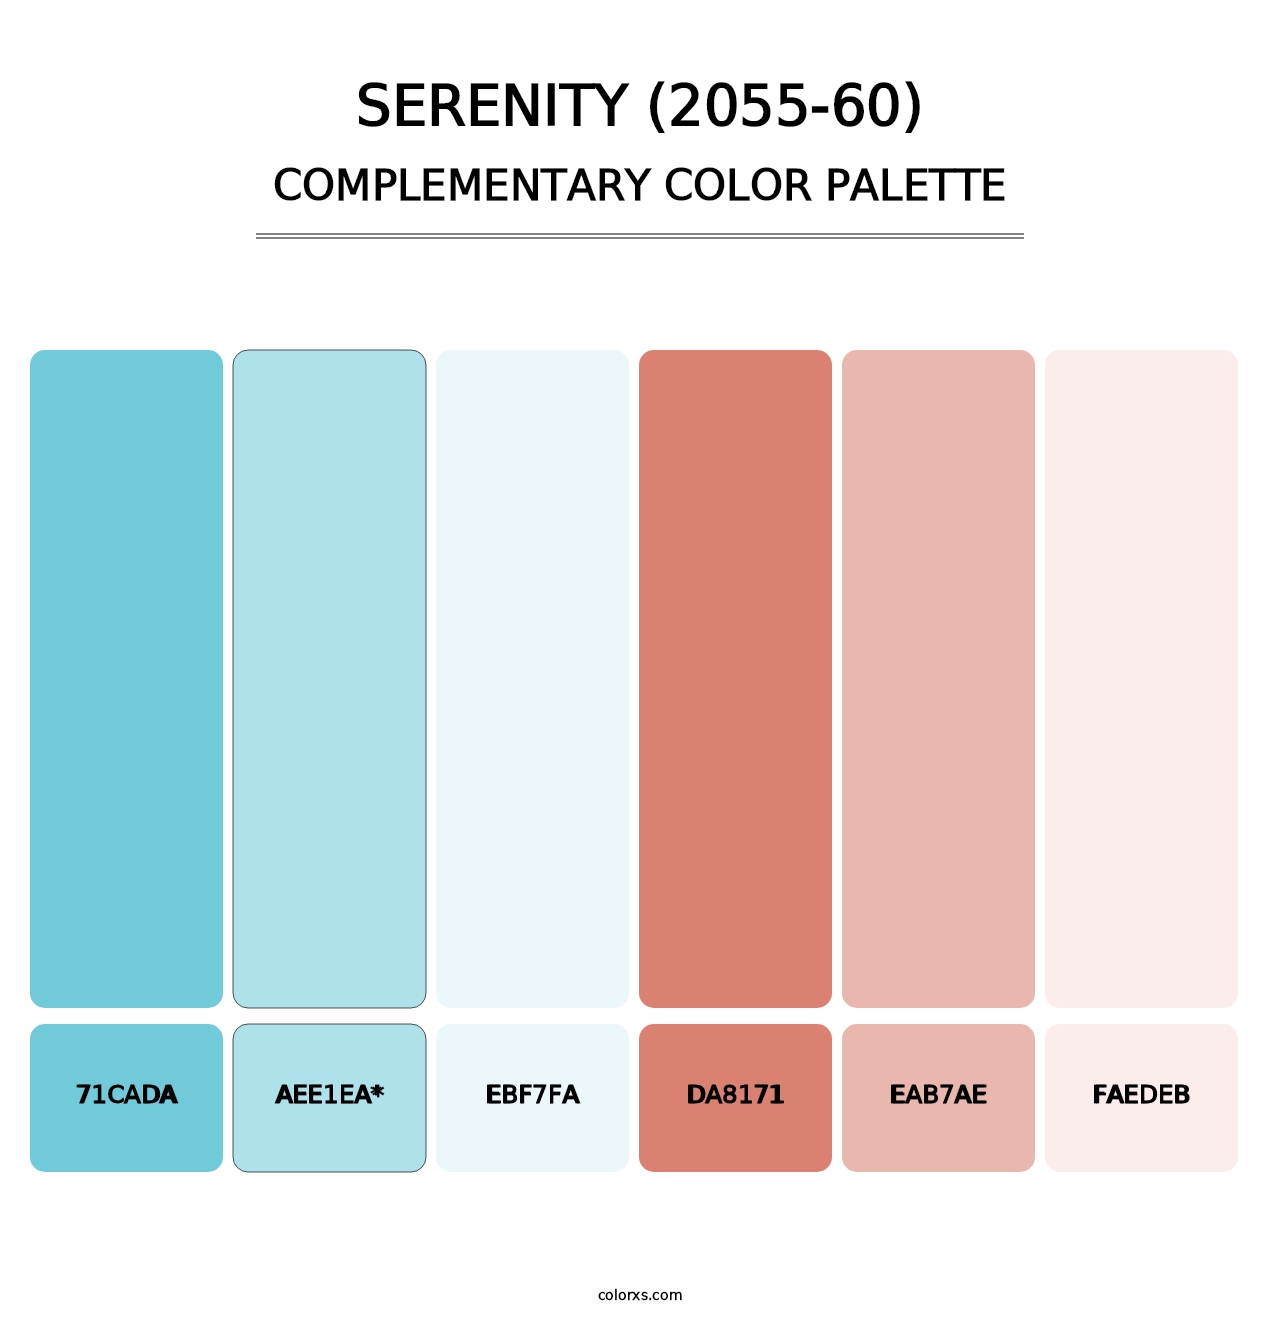 Serenity (2055-60) - Complementary Color Palette